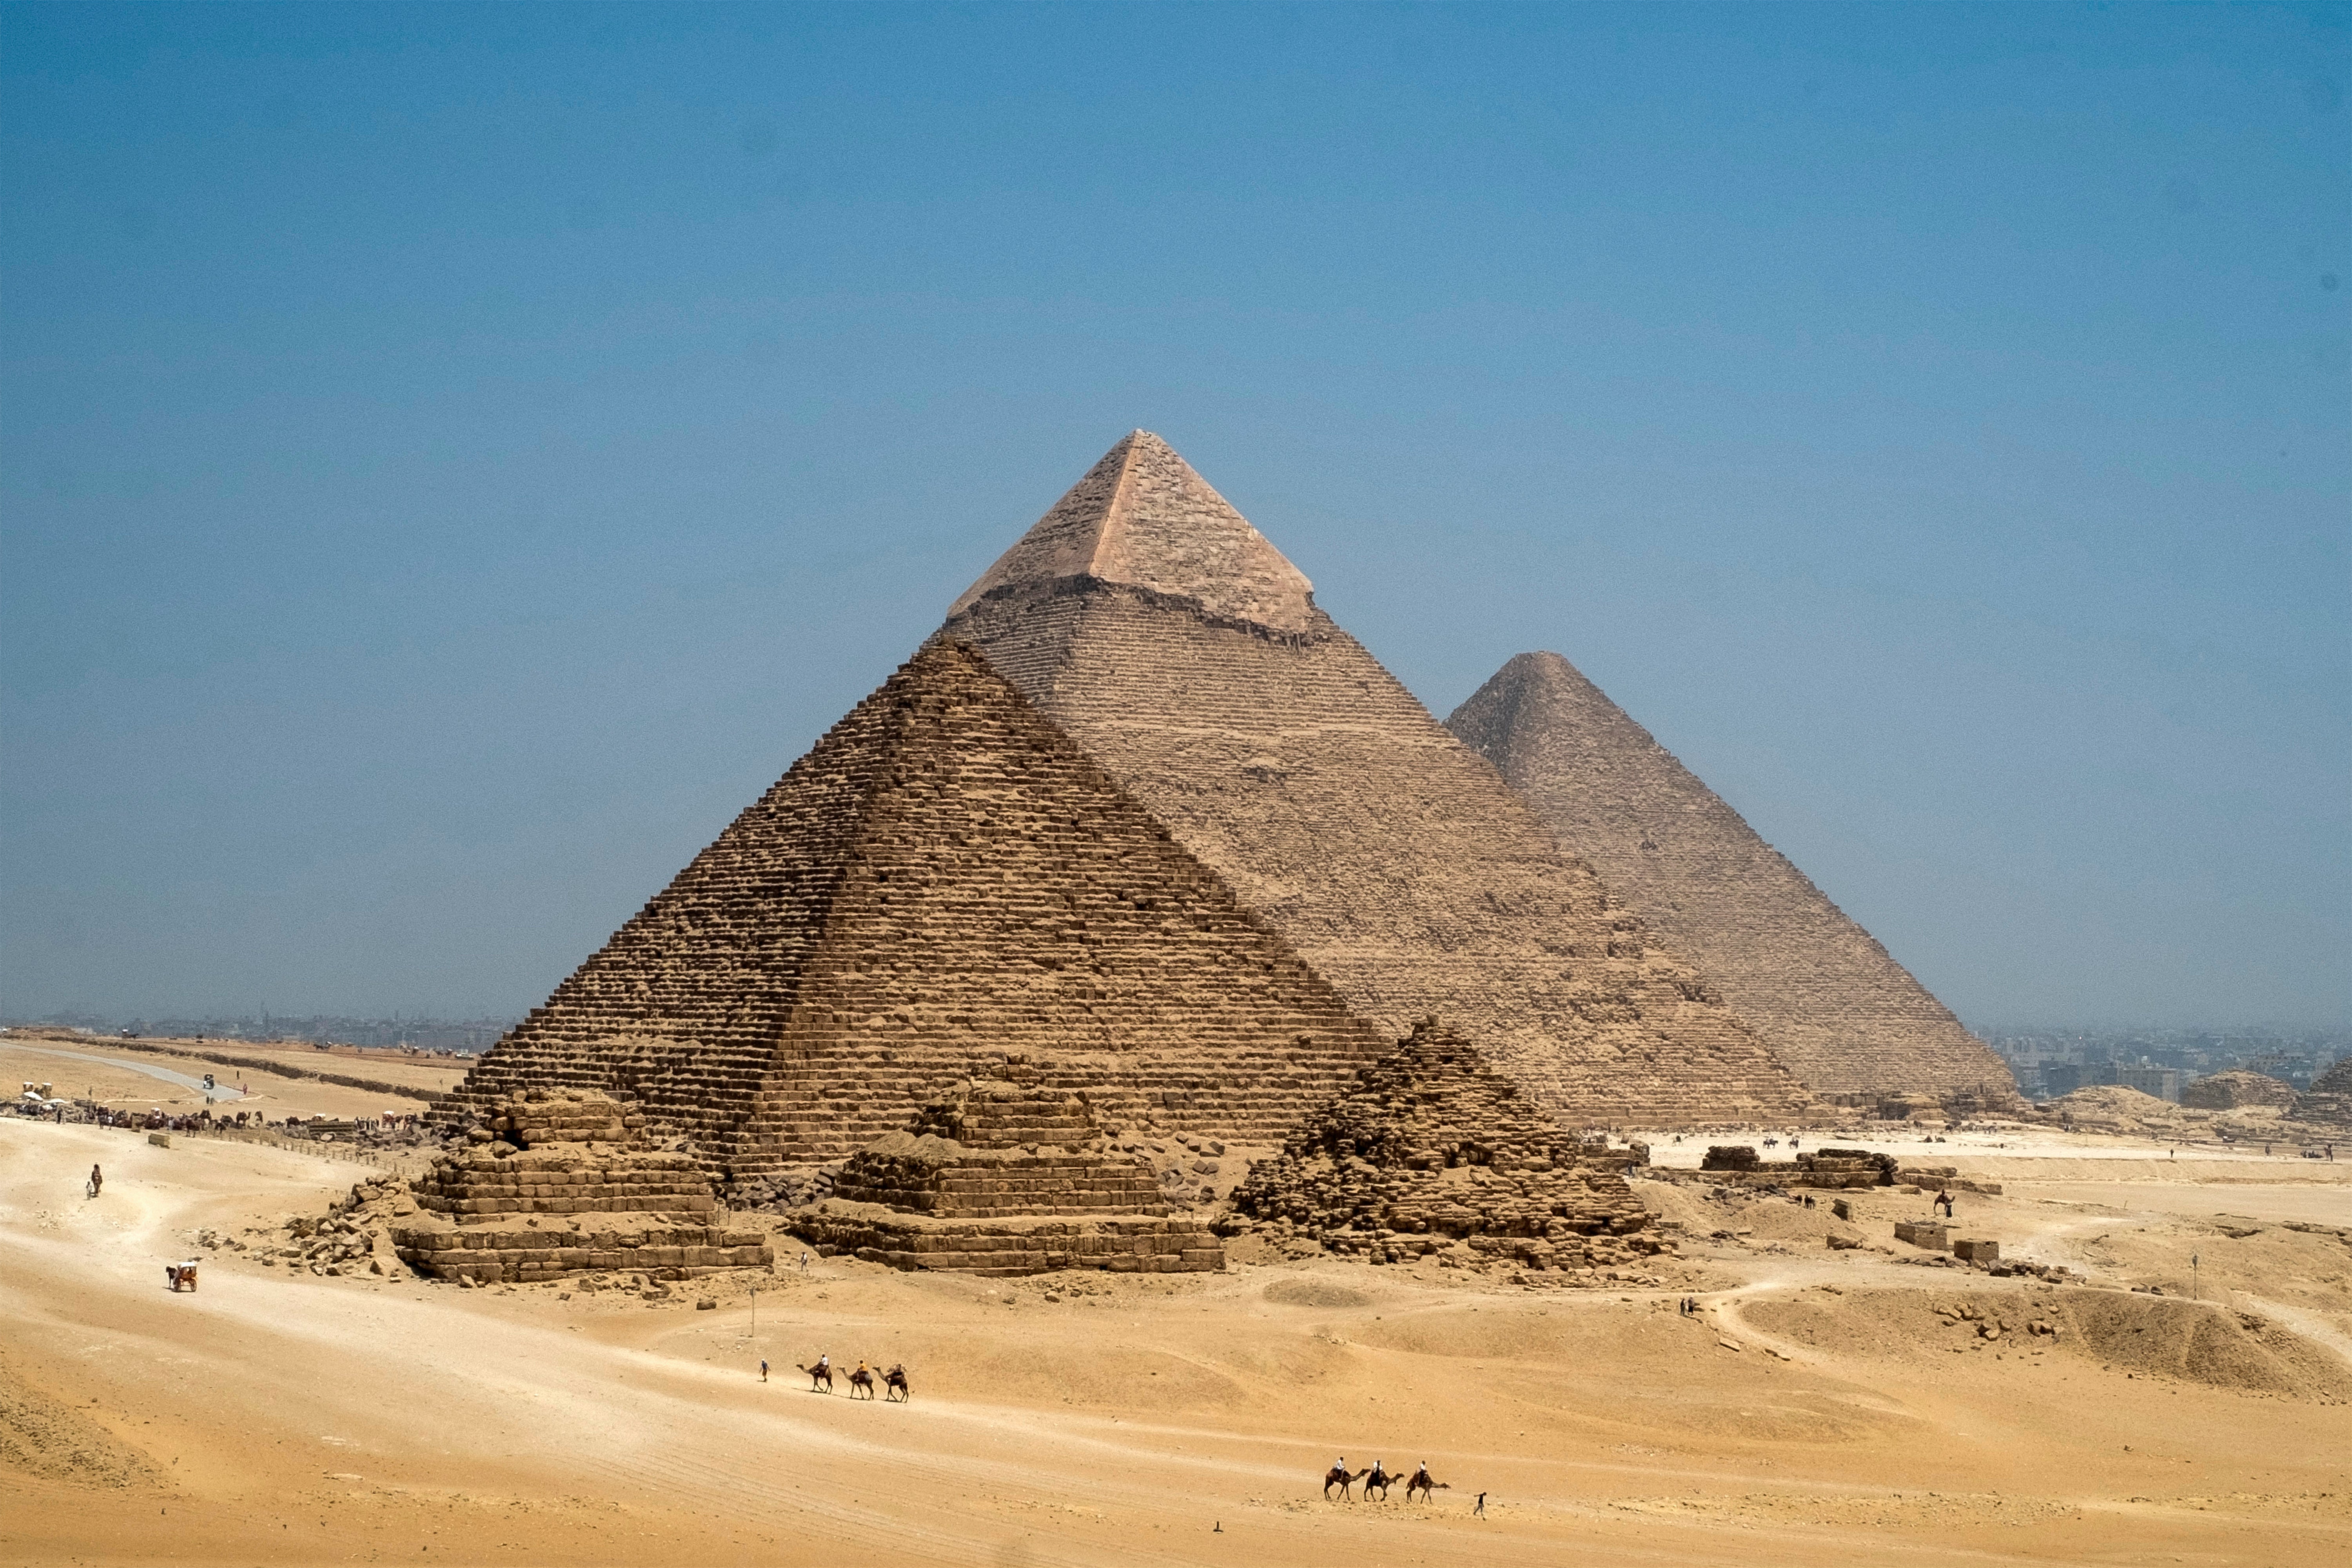 The construction of the pyramids began around 4,700 years ago